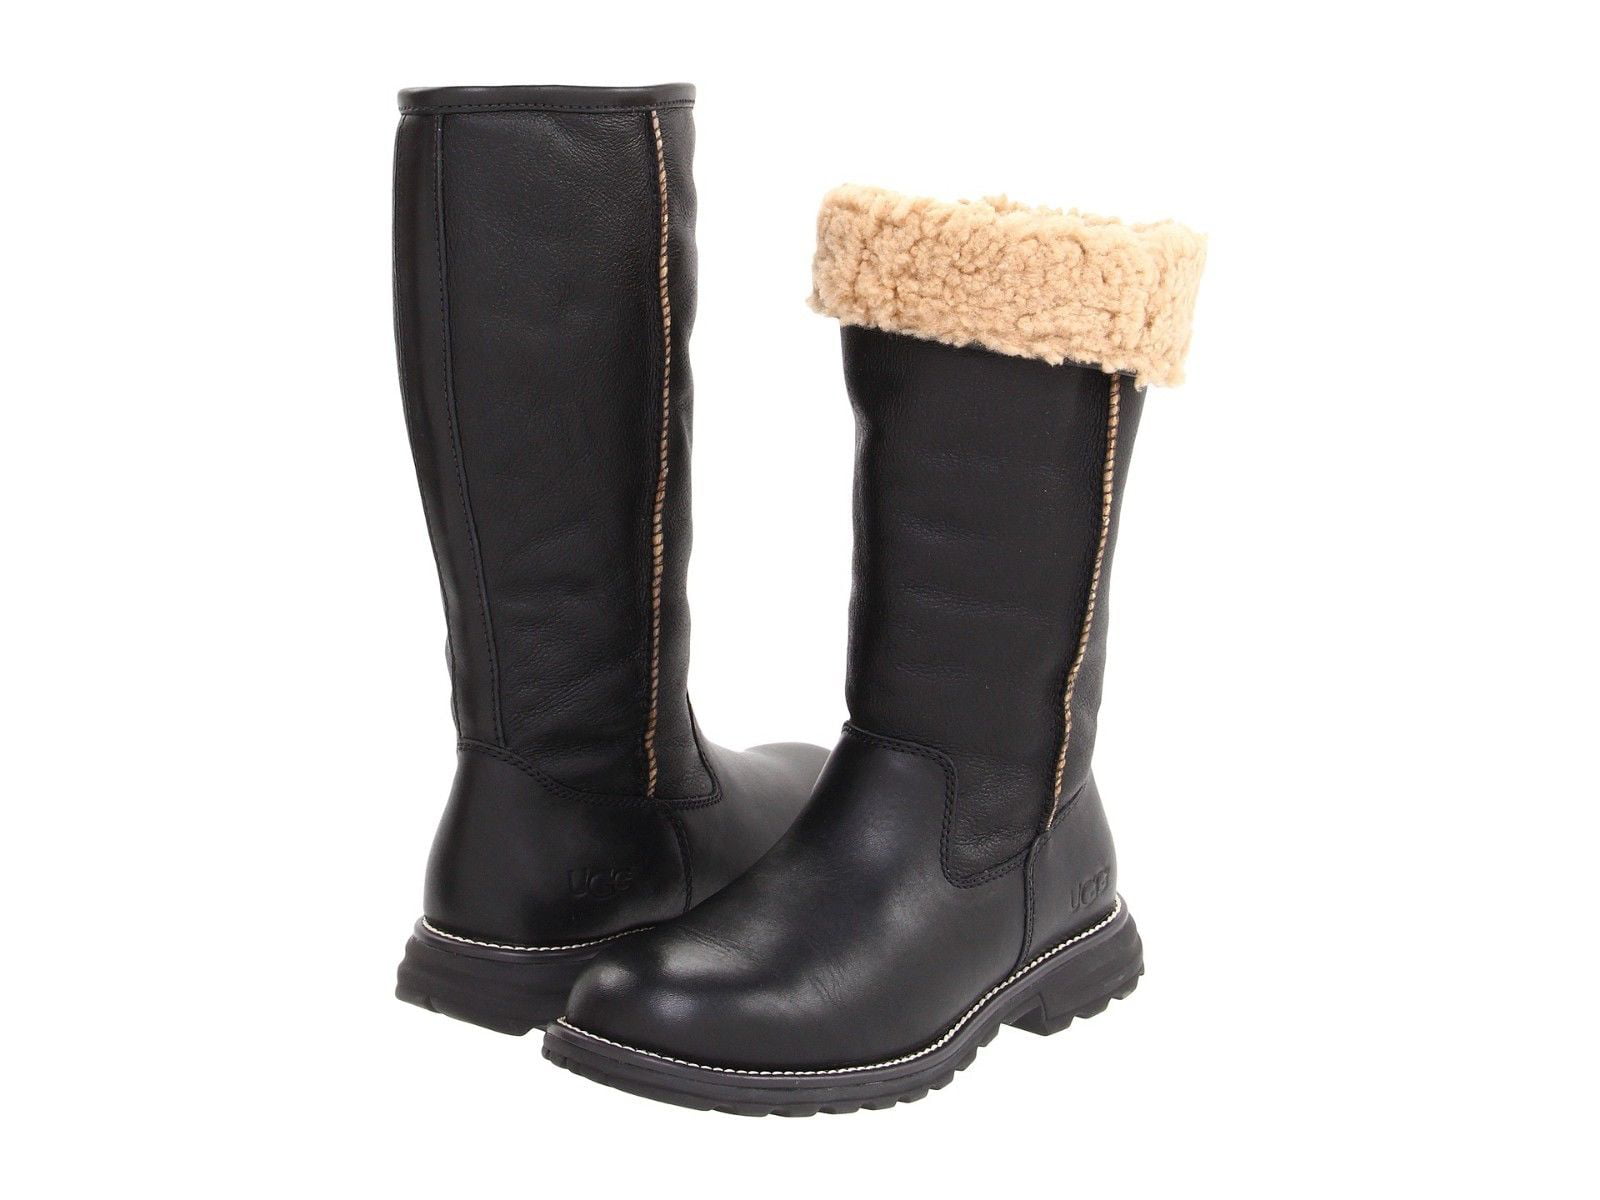 ugg leather boots tall